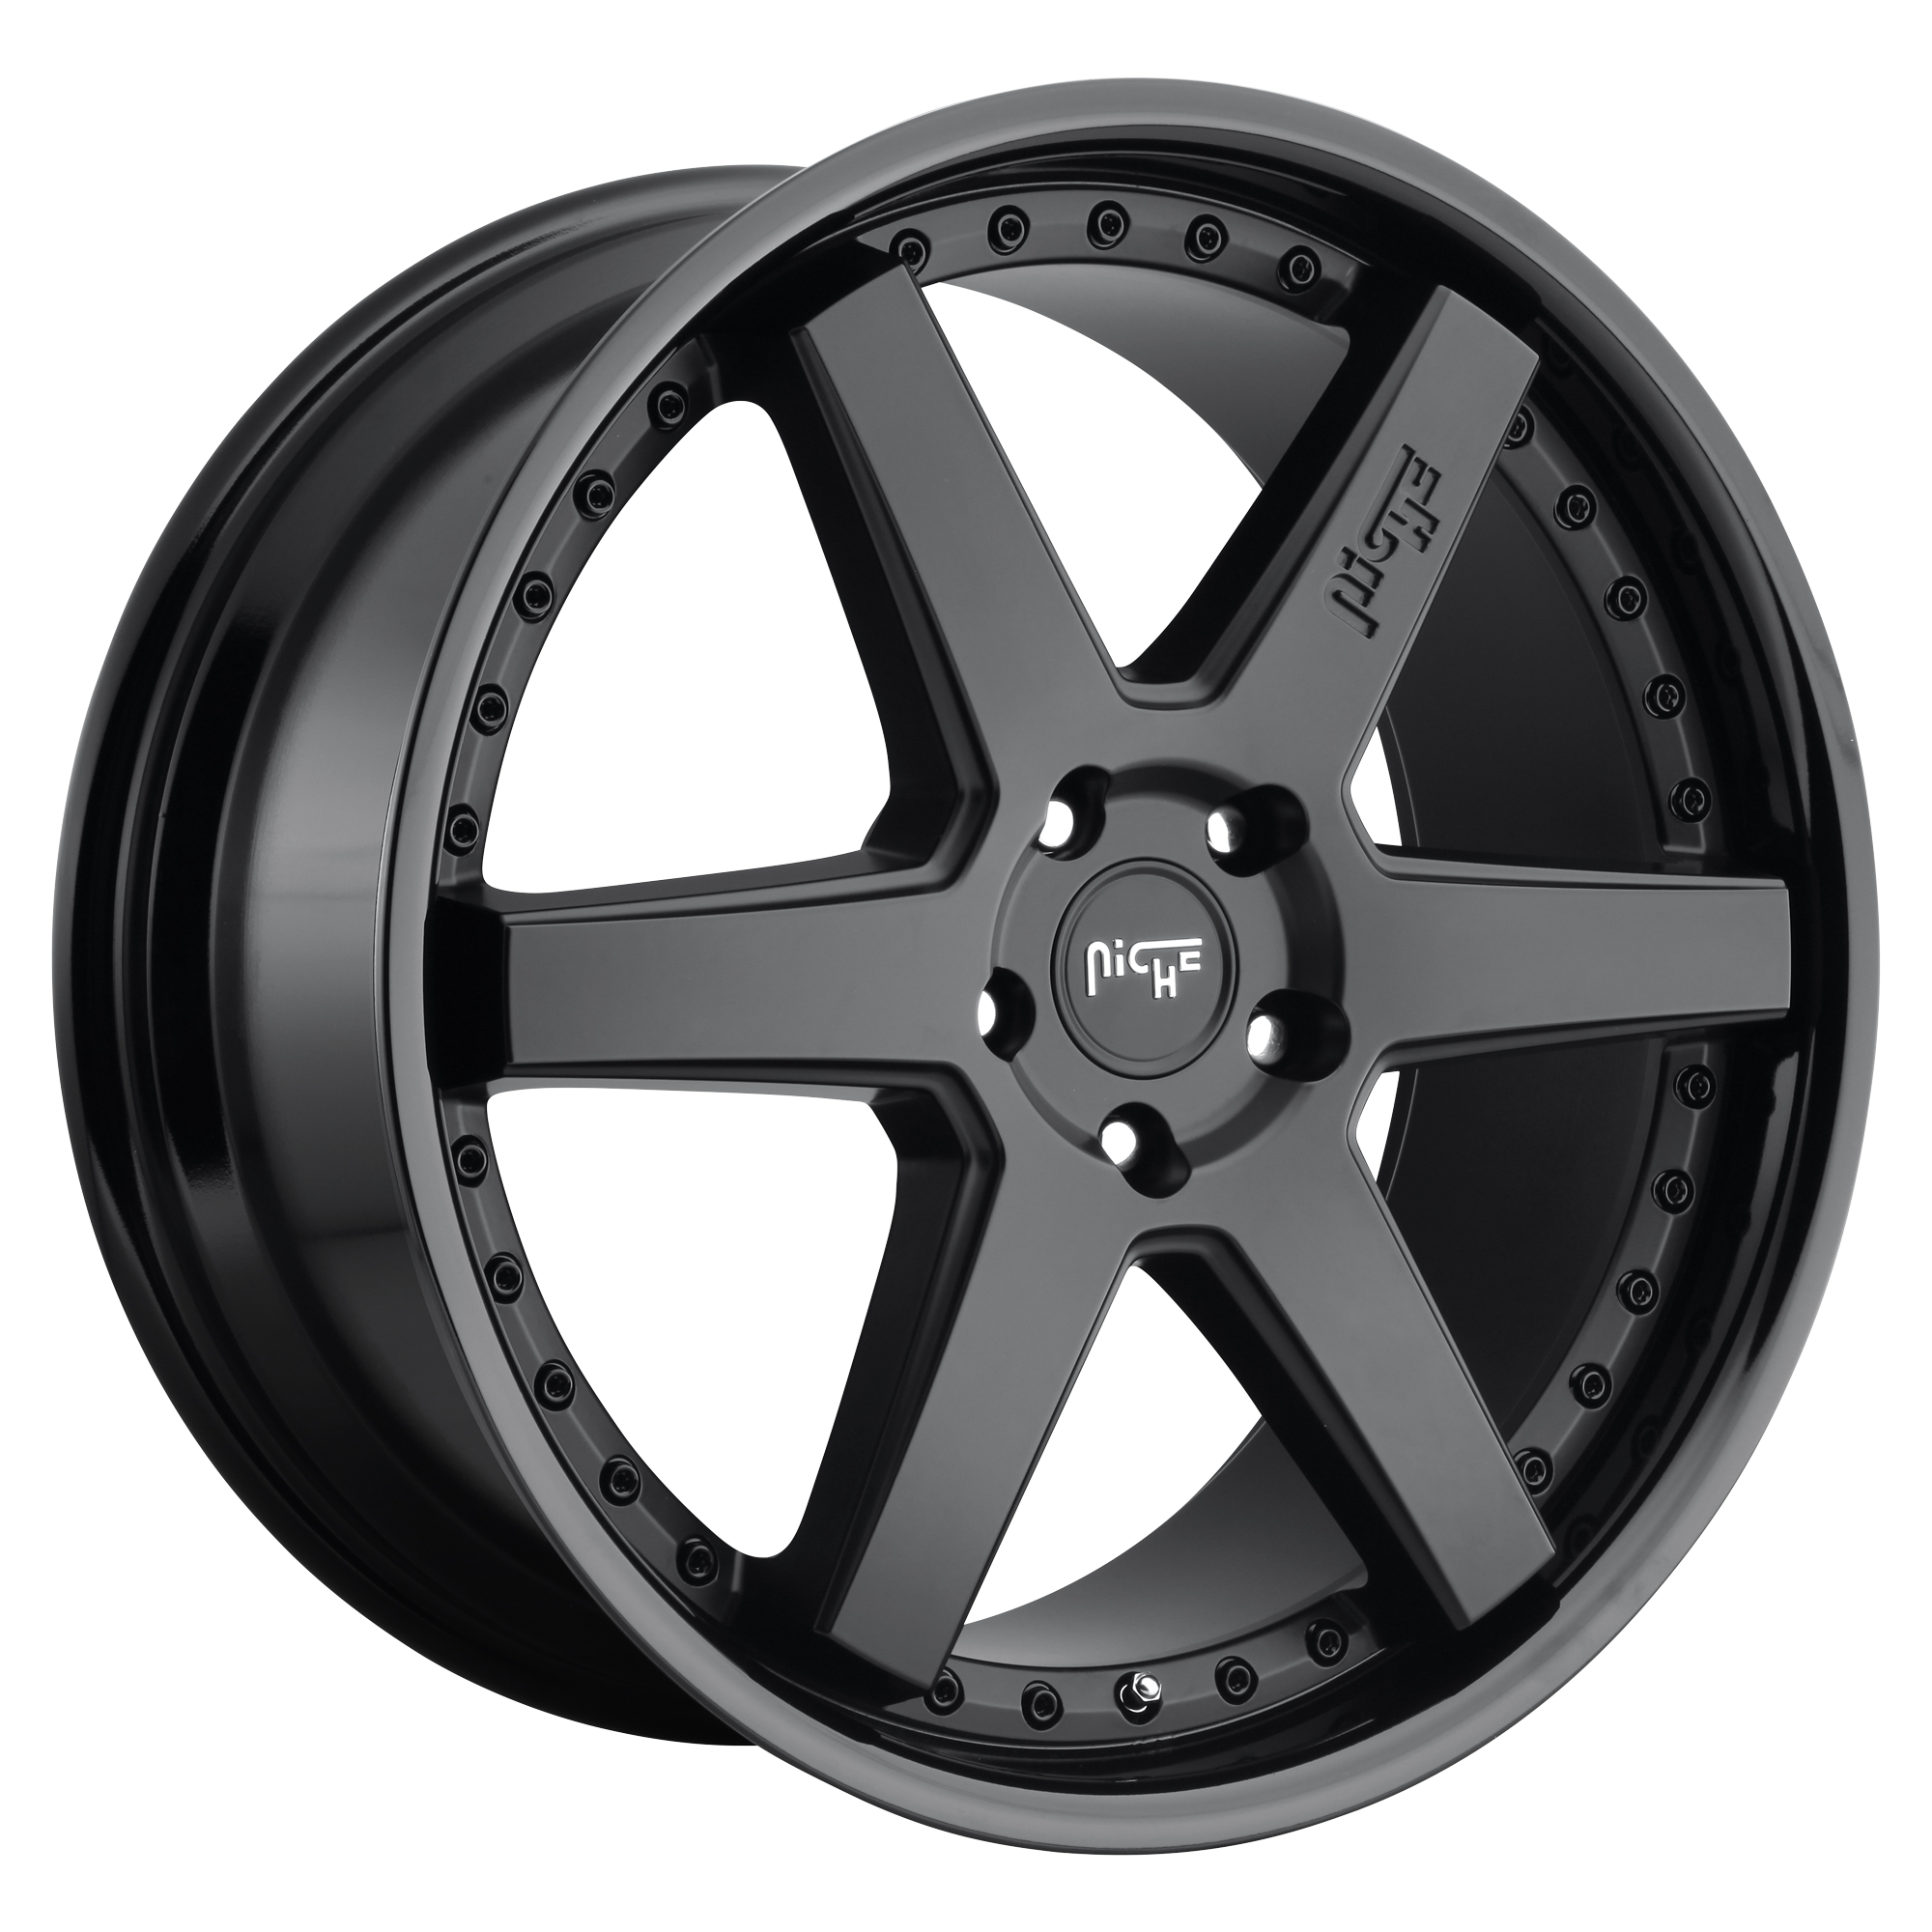 ALTAIR 20x10.5 5x120.00 GLOSS BLACK MATTE BLACK (35 mm) - Tires and Engine Performance